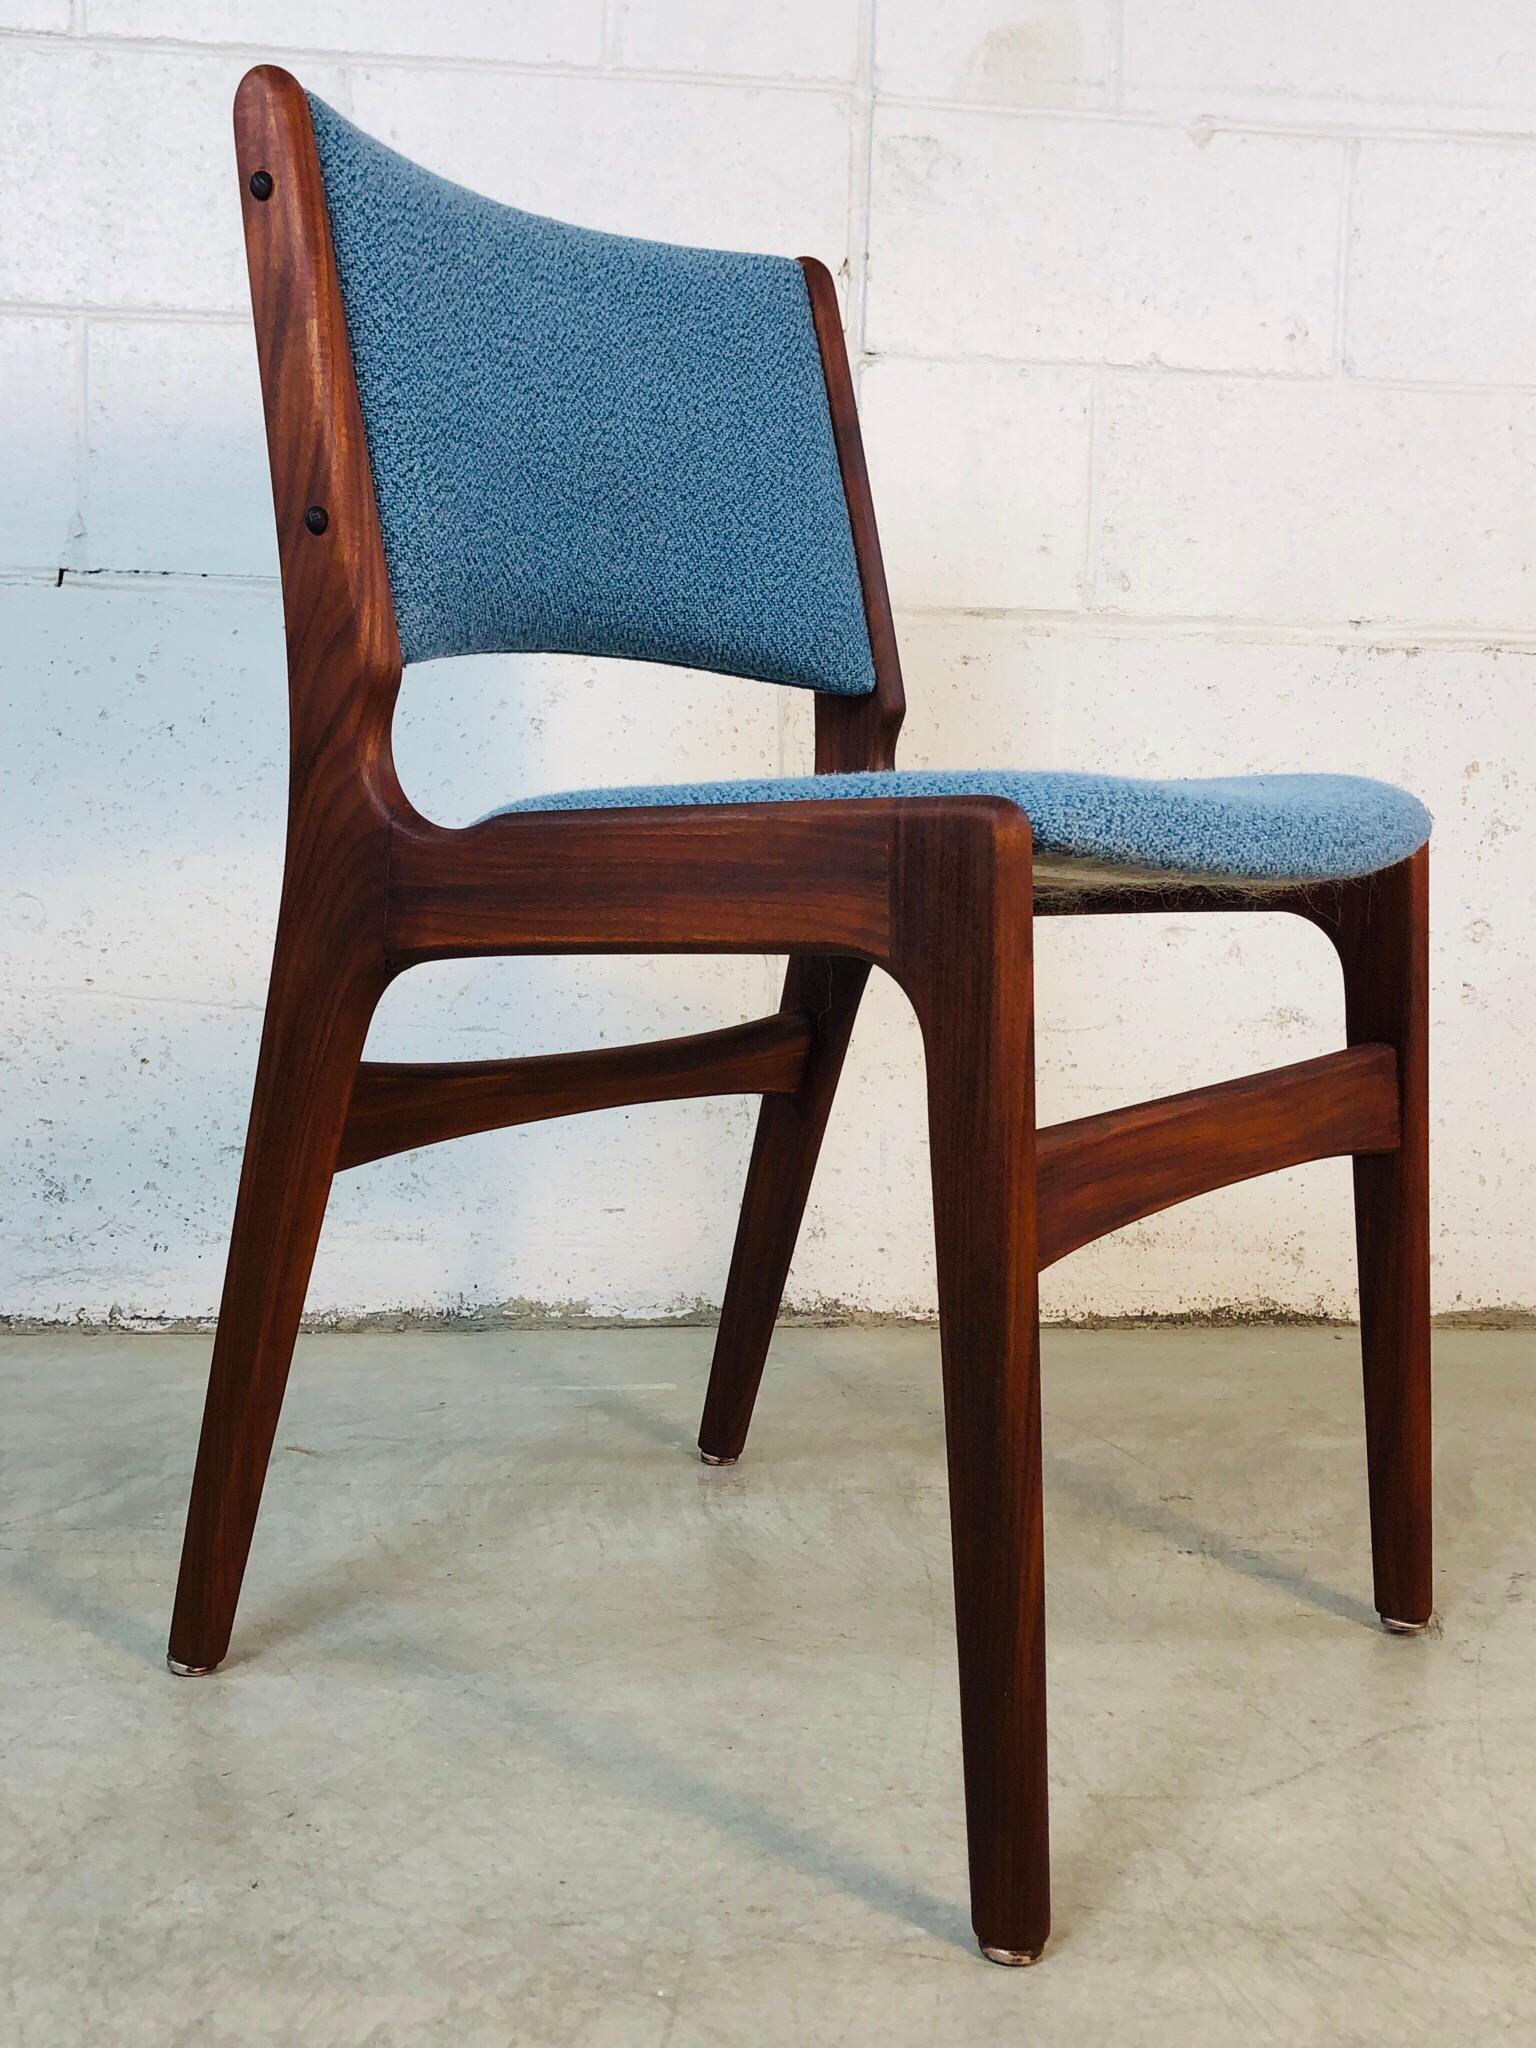 1960s Danish Teak Dining Room Chairs, Set of 4 For Sale 2